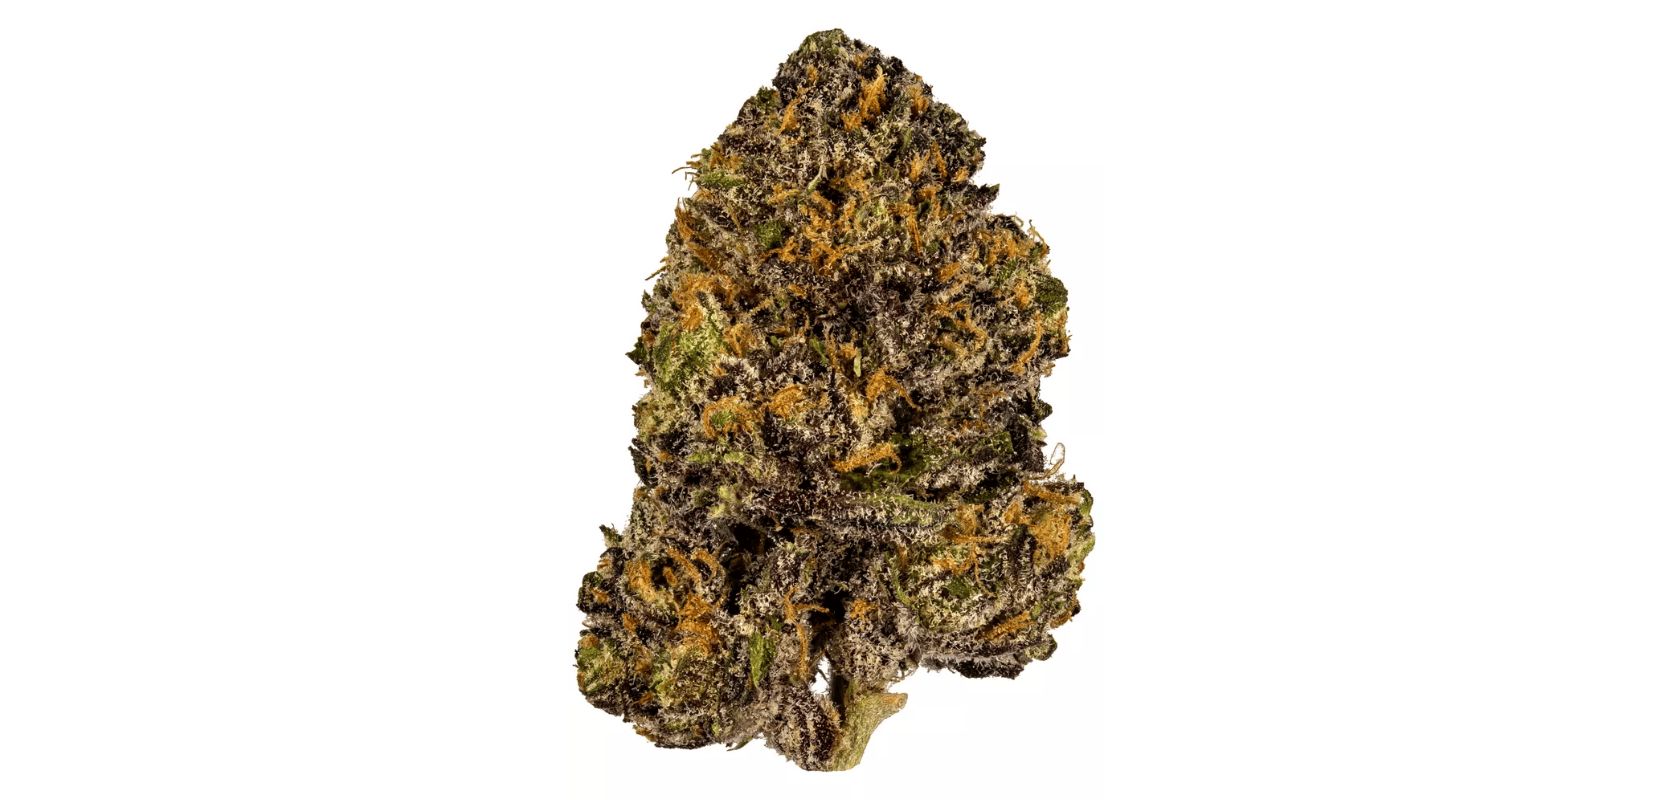 The Grand Daddy Purple strain delivers a potent psychoactive experience while enchanting your senses with its vibrant purple foliage and fruity grape and berry aroma.